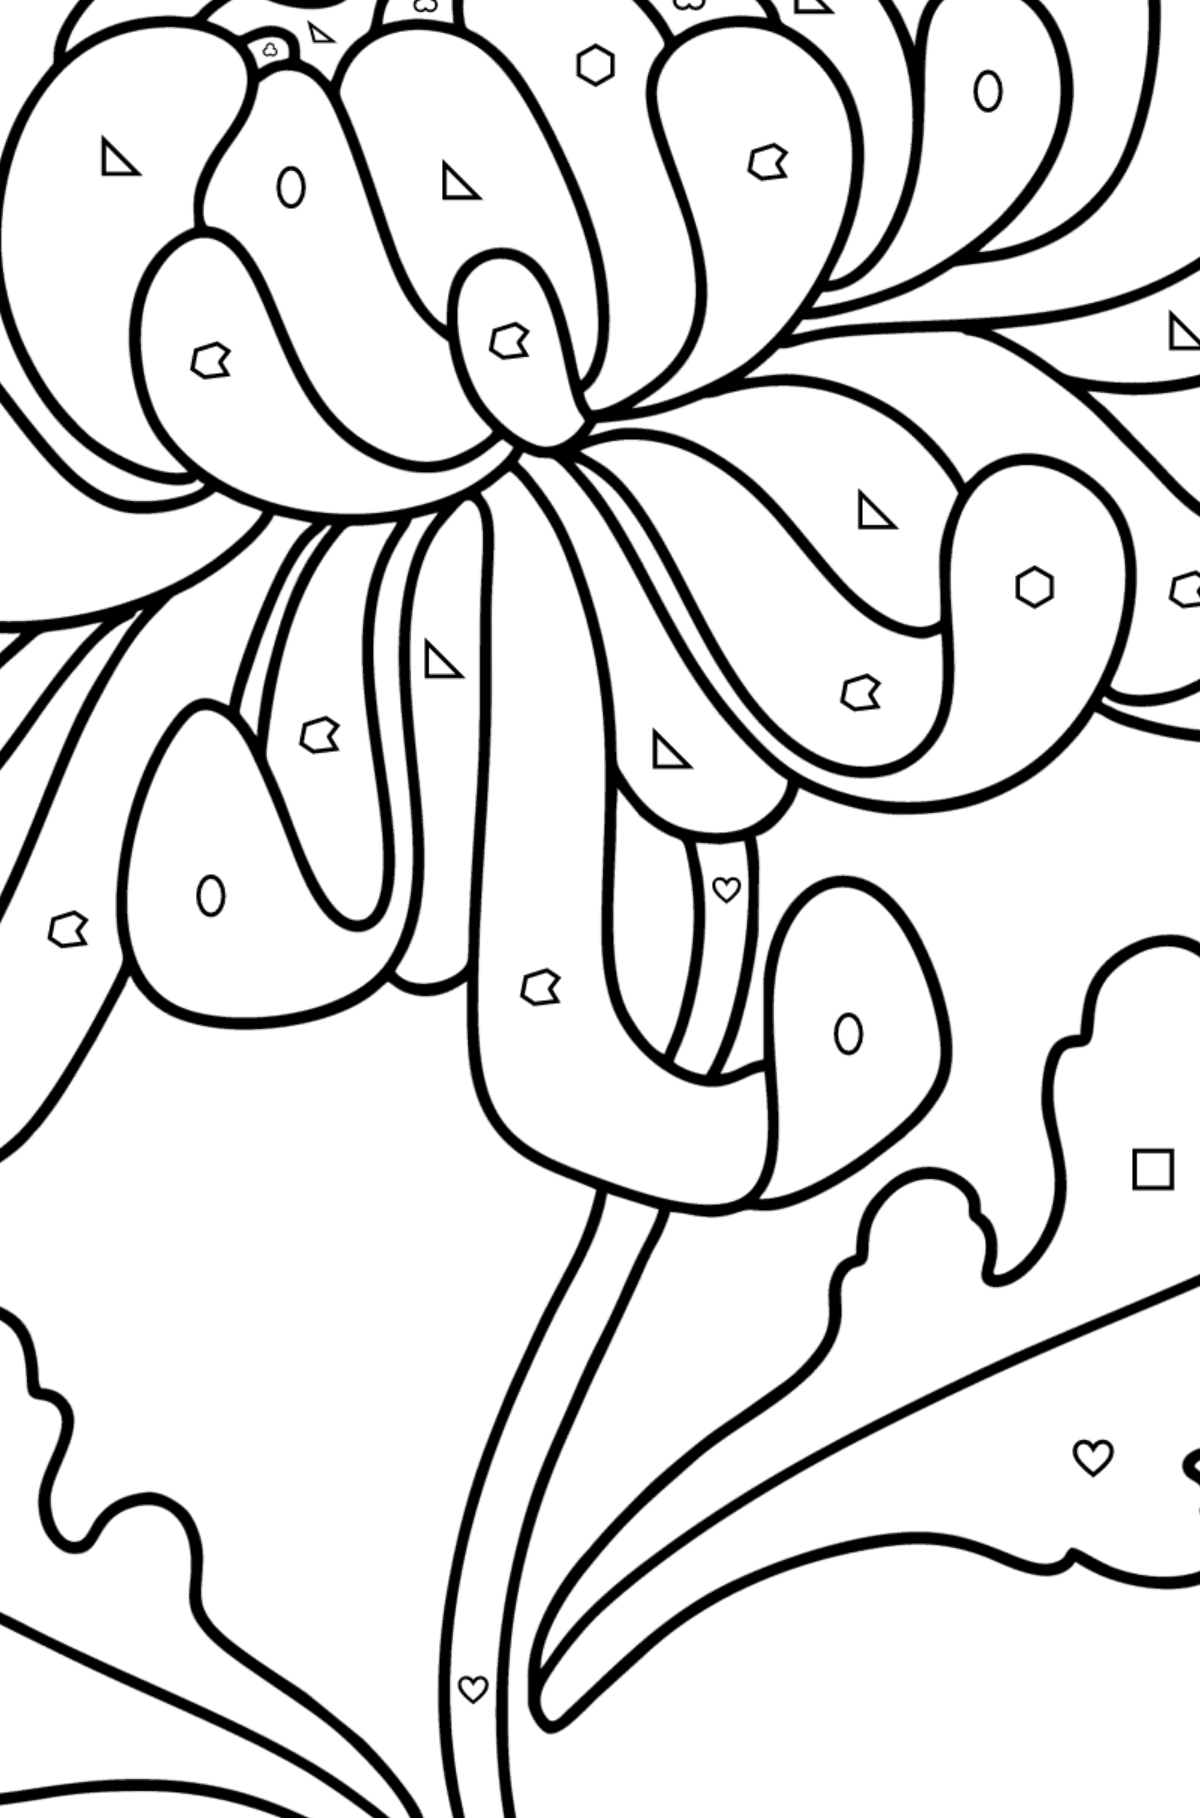 Chrysanthemums coloring page - Coloring by Geometric Shapes for Kids